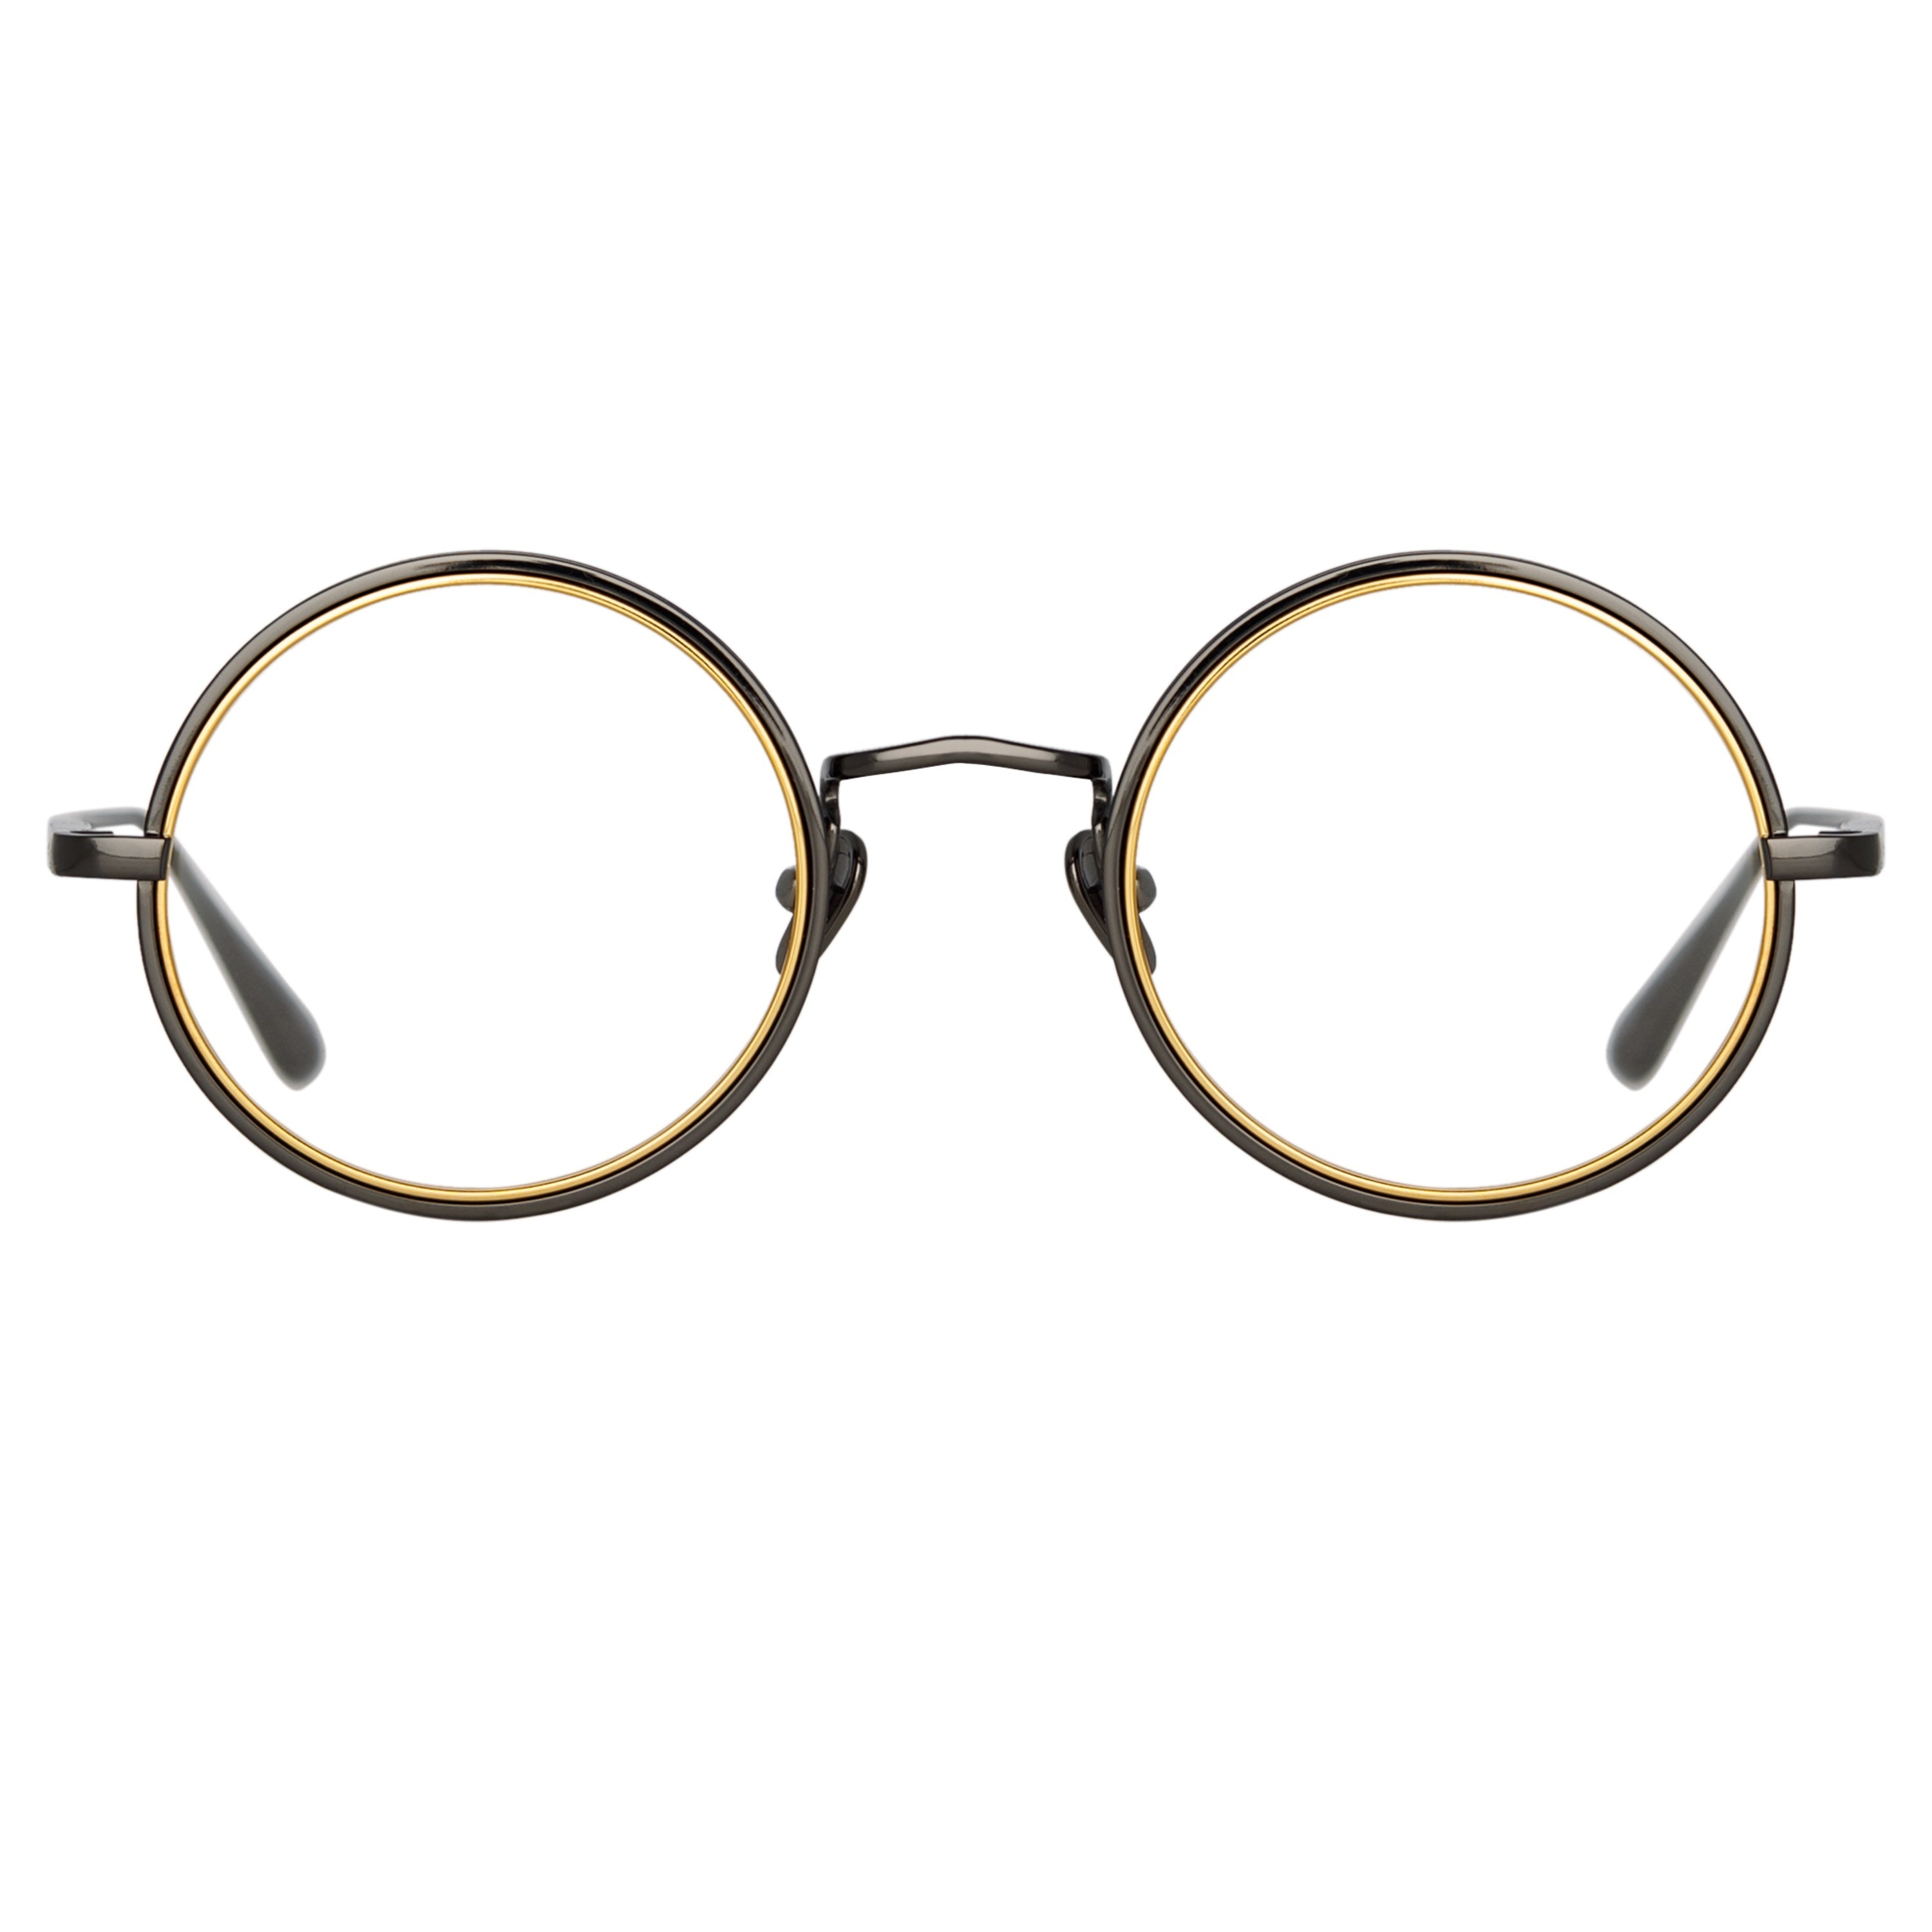 CORTINA OVAL OPTICAL FRAME IN NICKEL AND YELLOW GOLD - 1